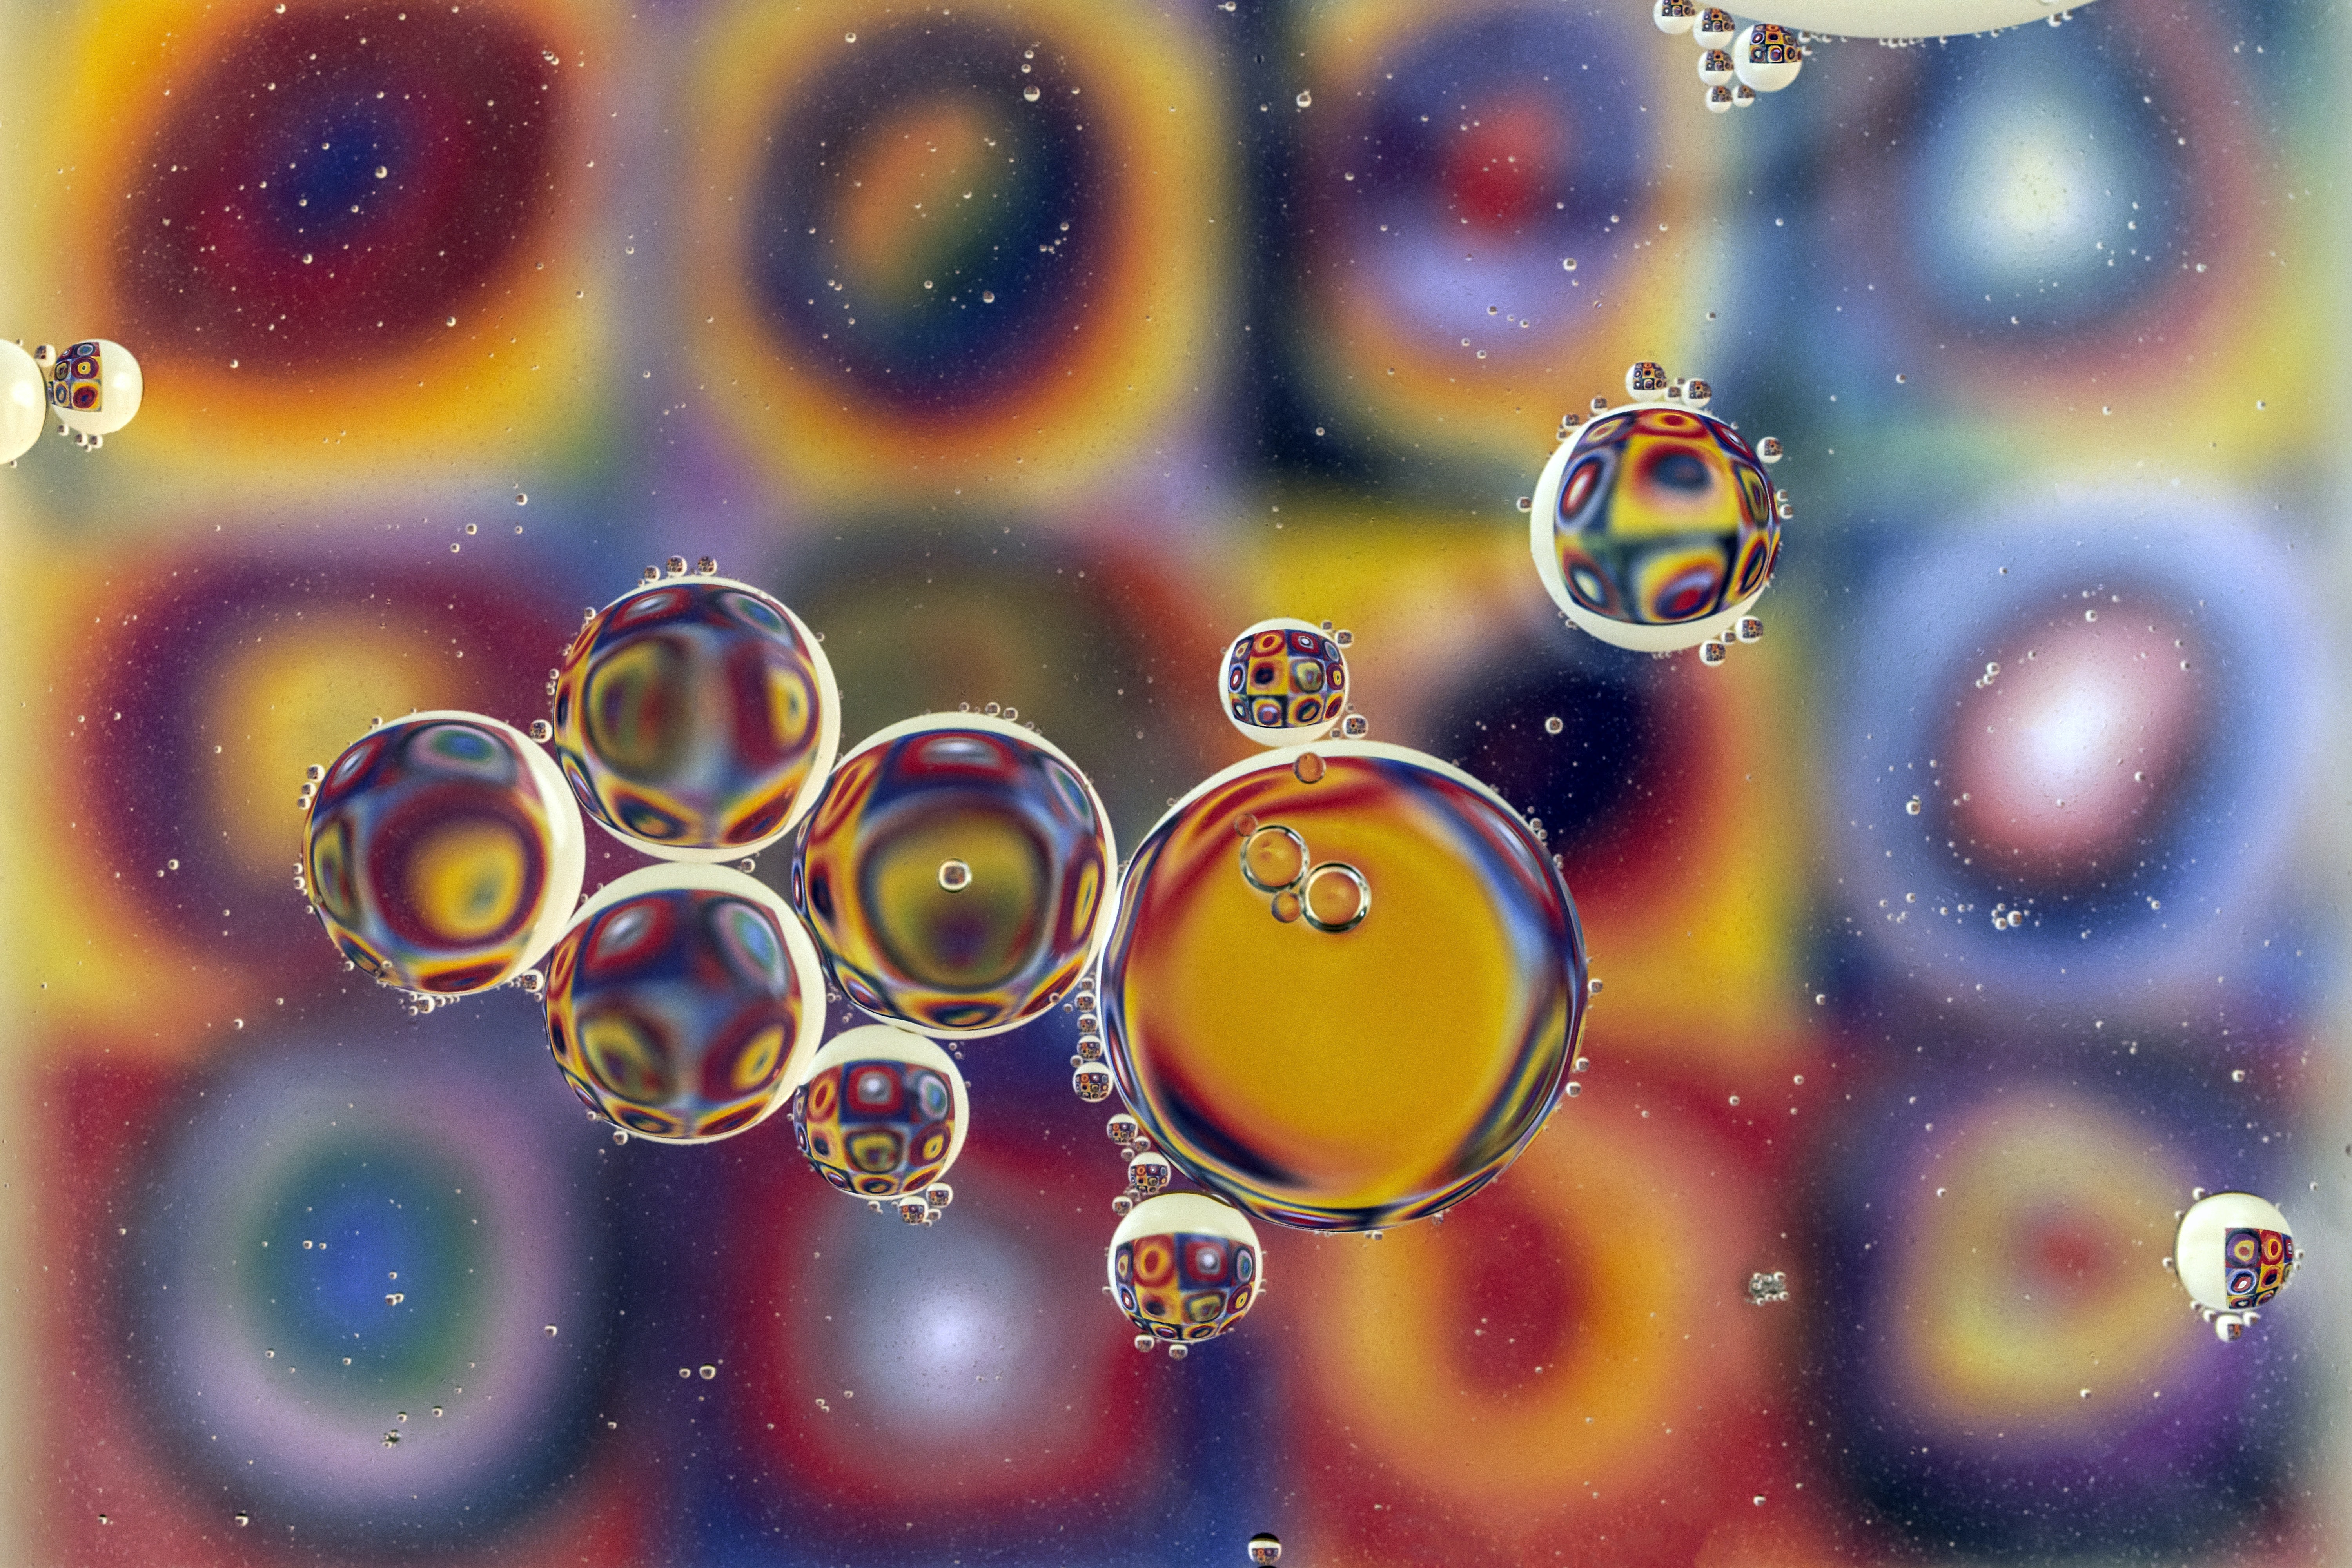 motley, abstract, multicolored, water, bubbles, blur, smooth